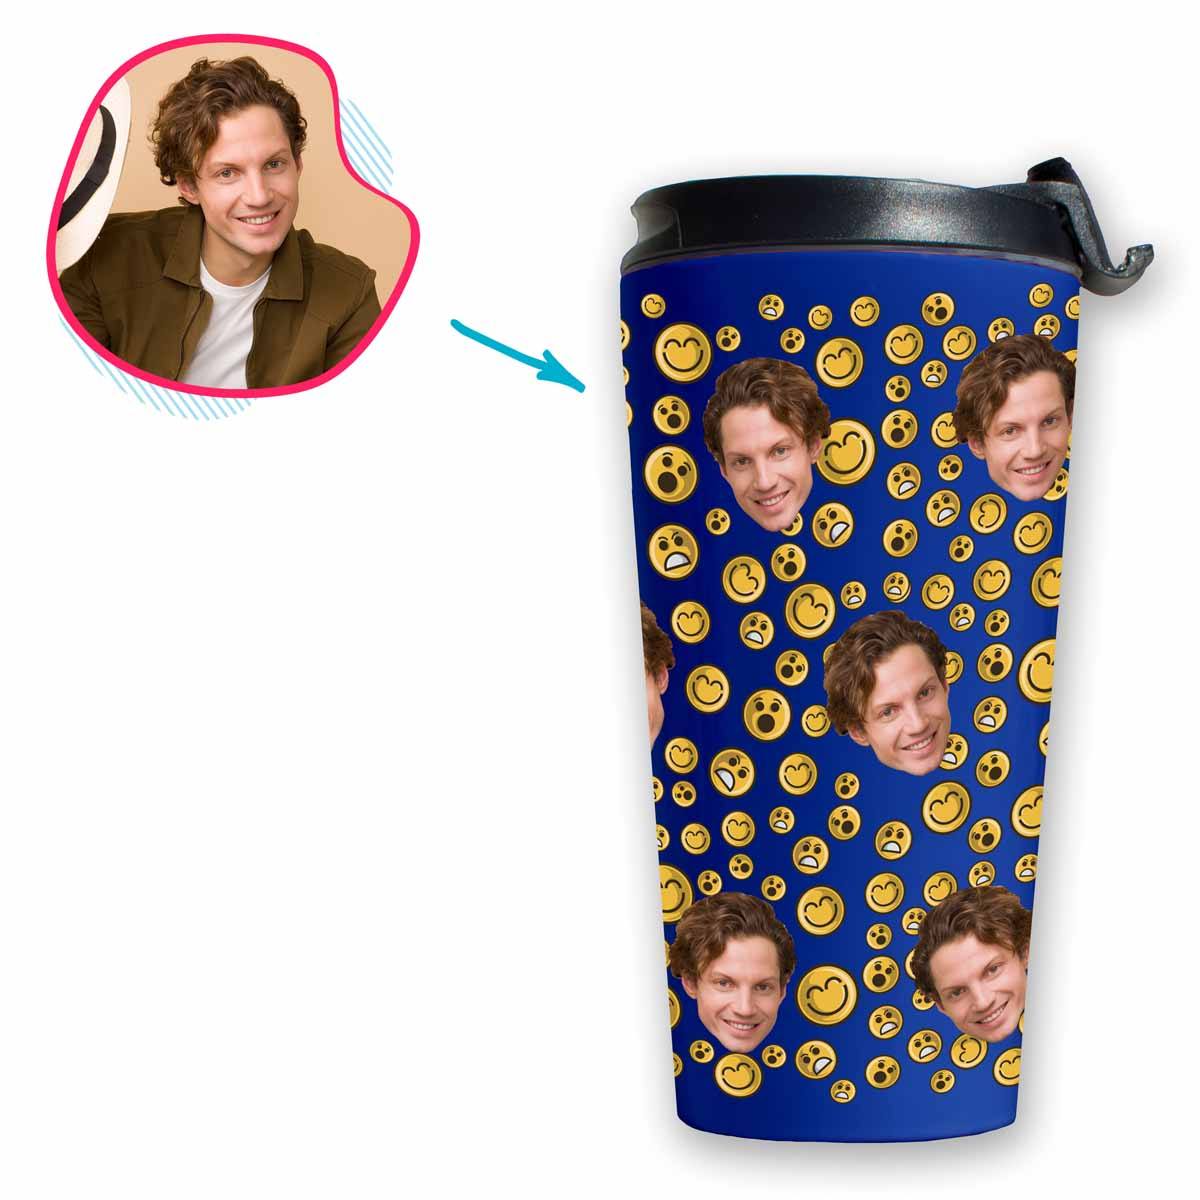 darkblue Smiles travel mug personalized with photo of face printed on it